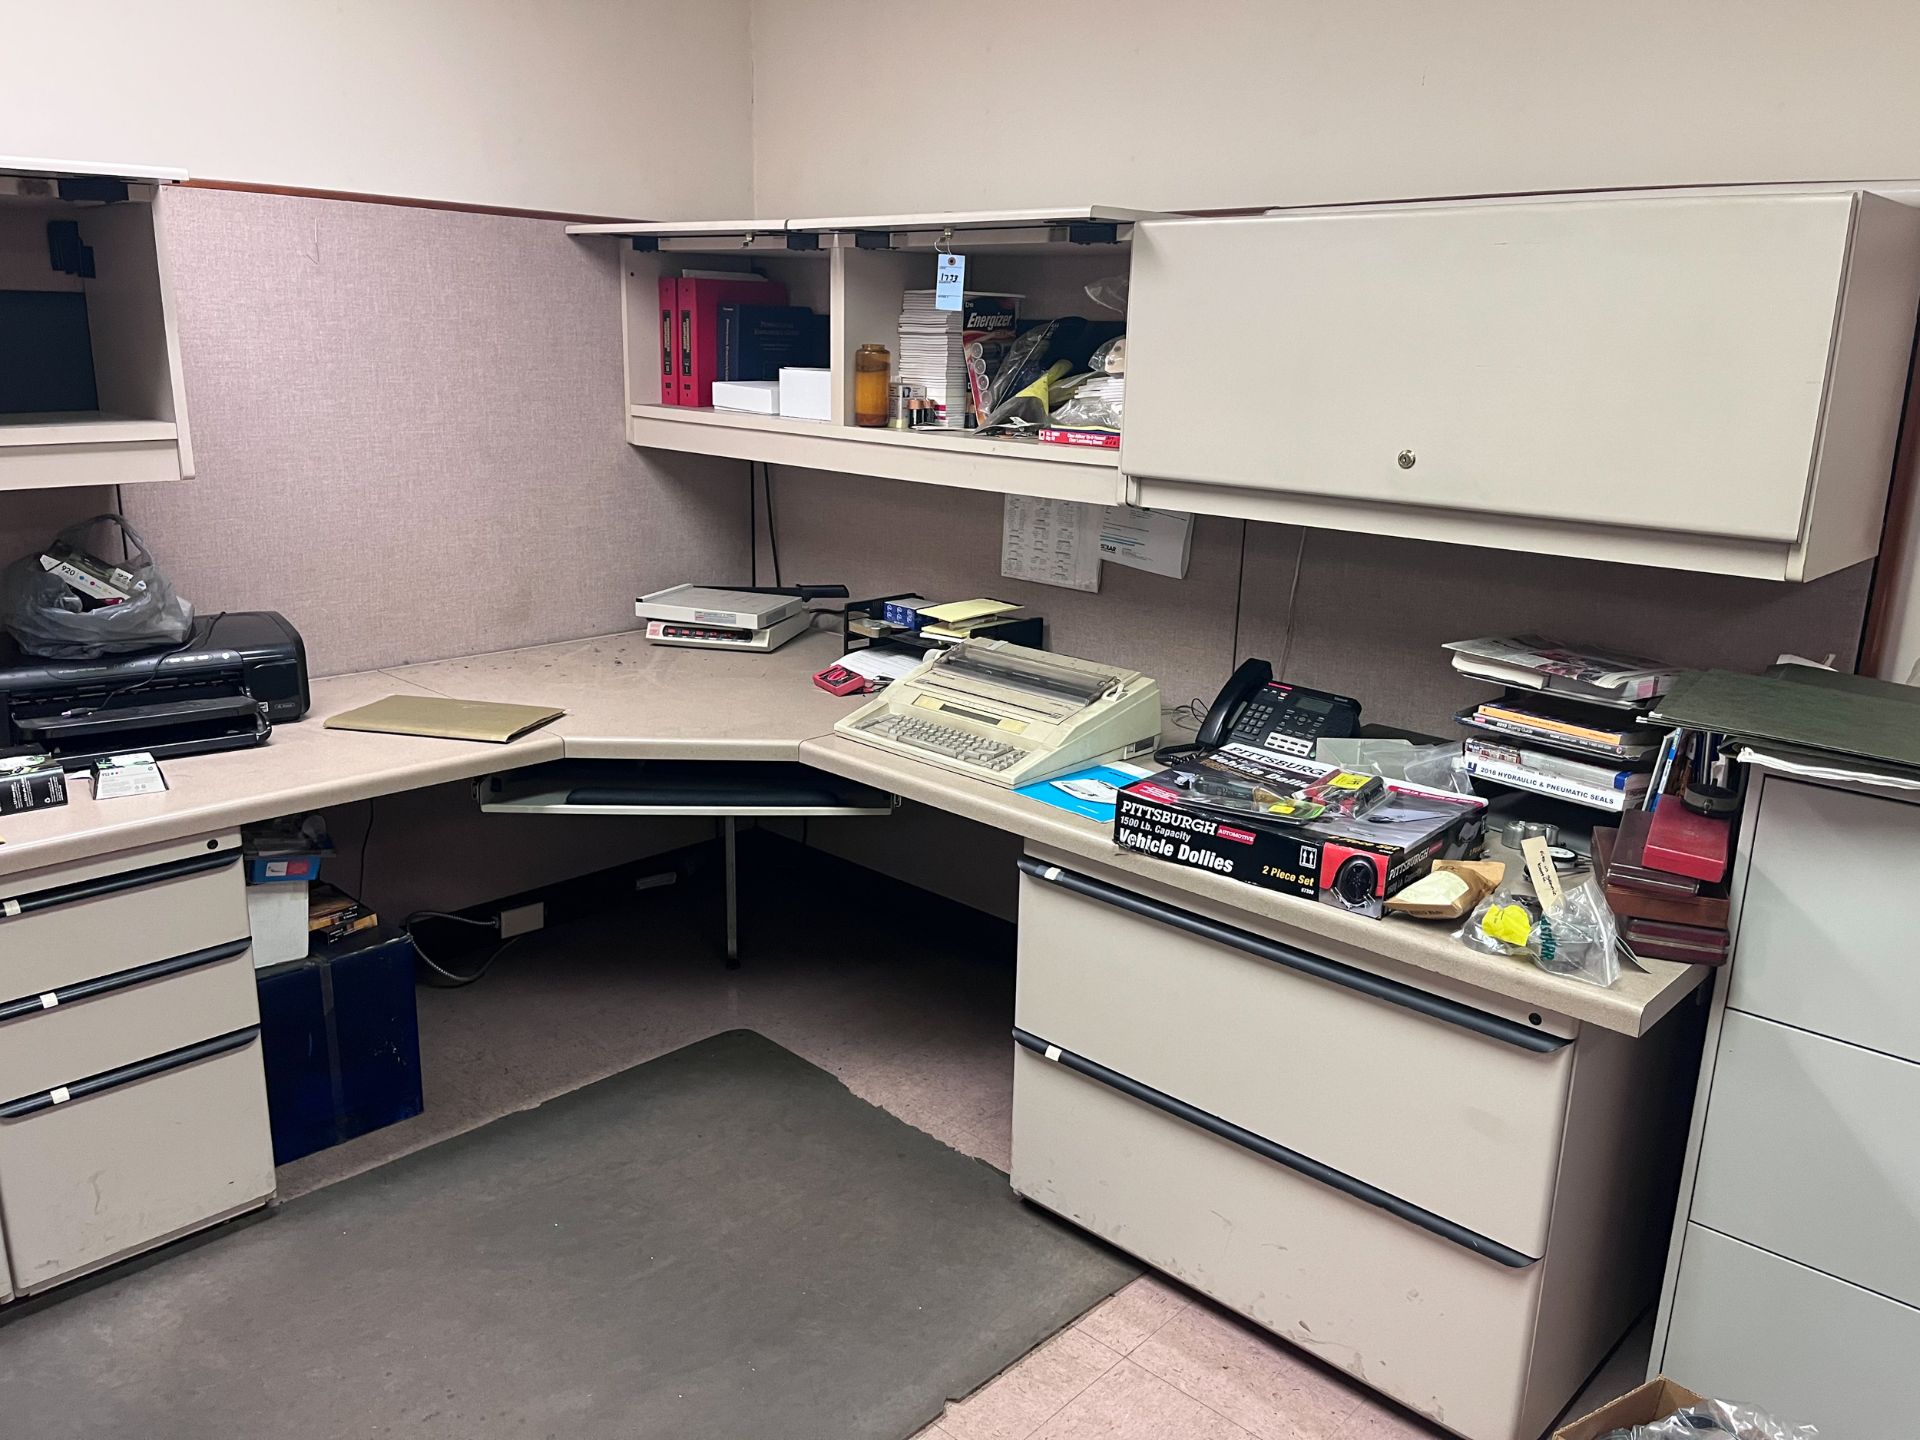 Office Divider Walls, Overhead Cabinets, & More - Image 2 of 3